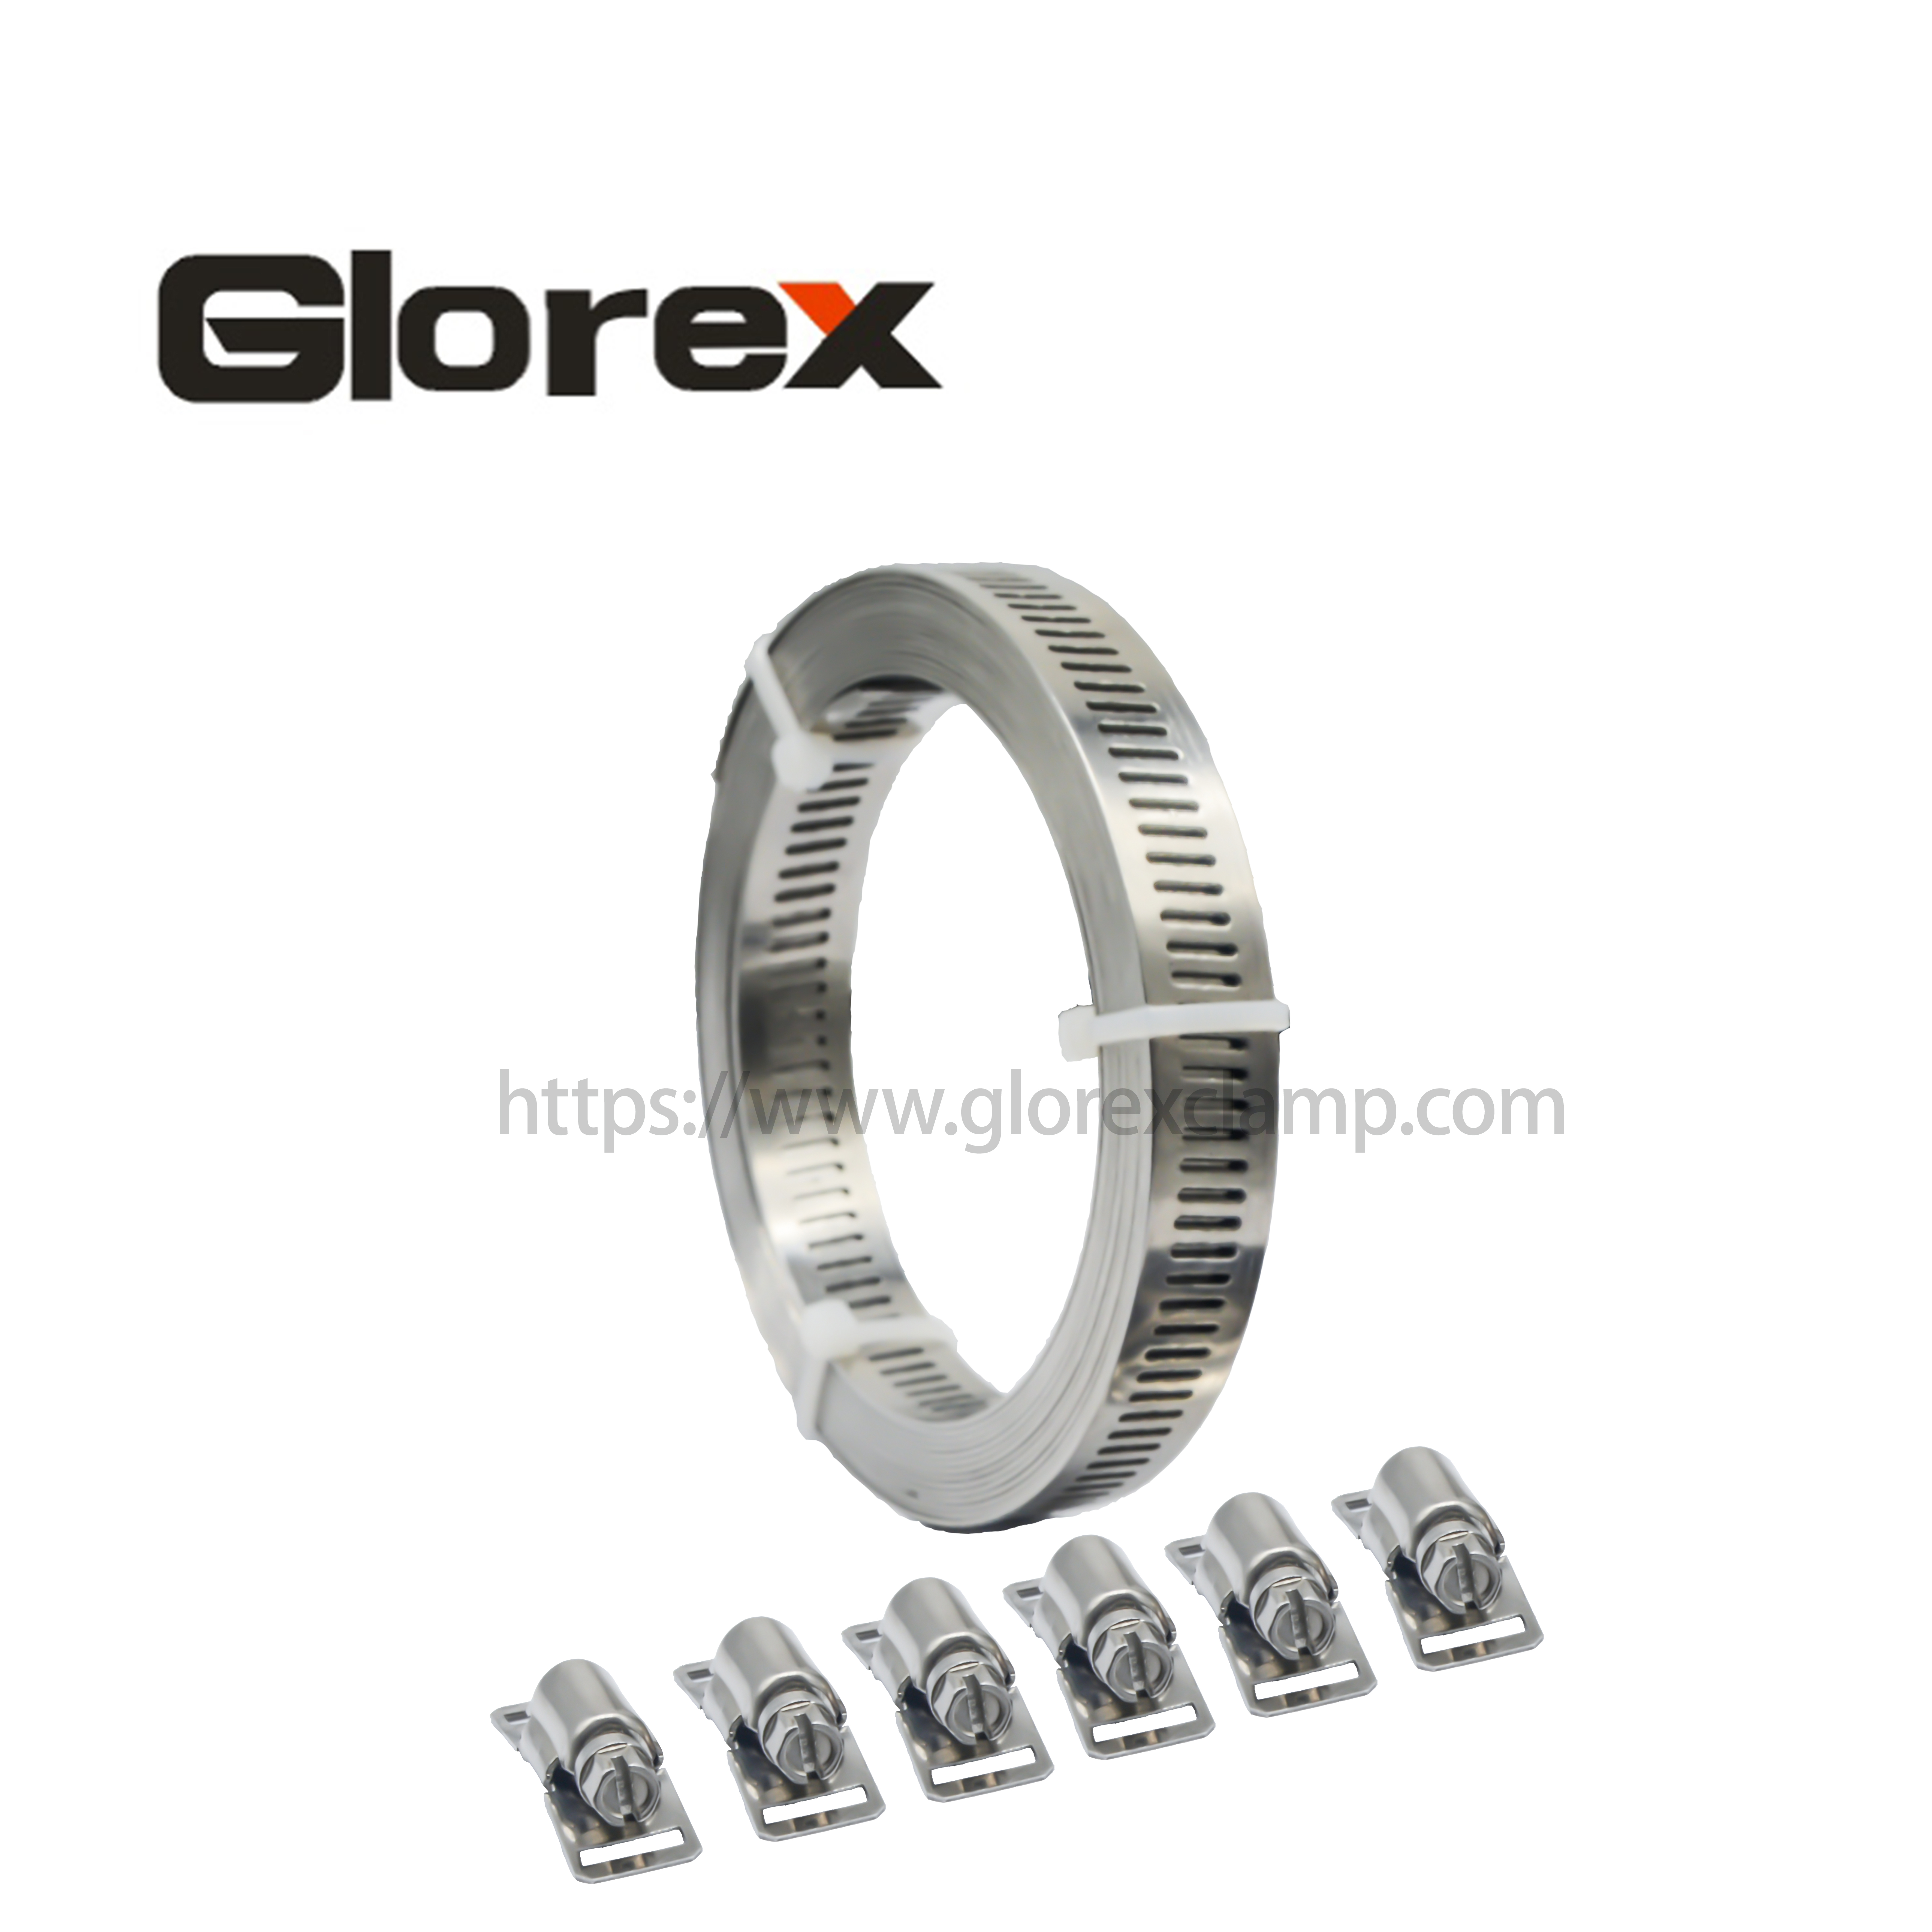 Discount Price Quick Connect Hose Clamps - 12.7mm American Set – Glorex